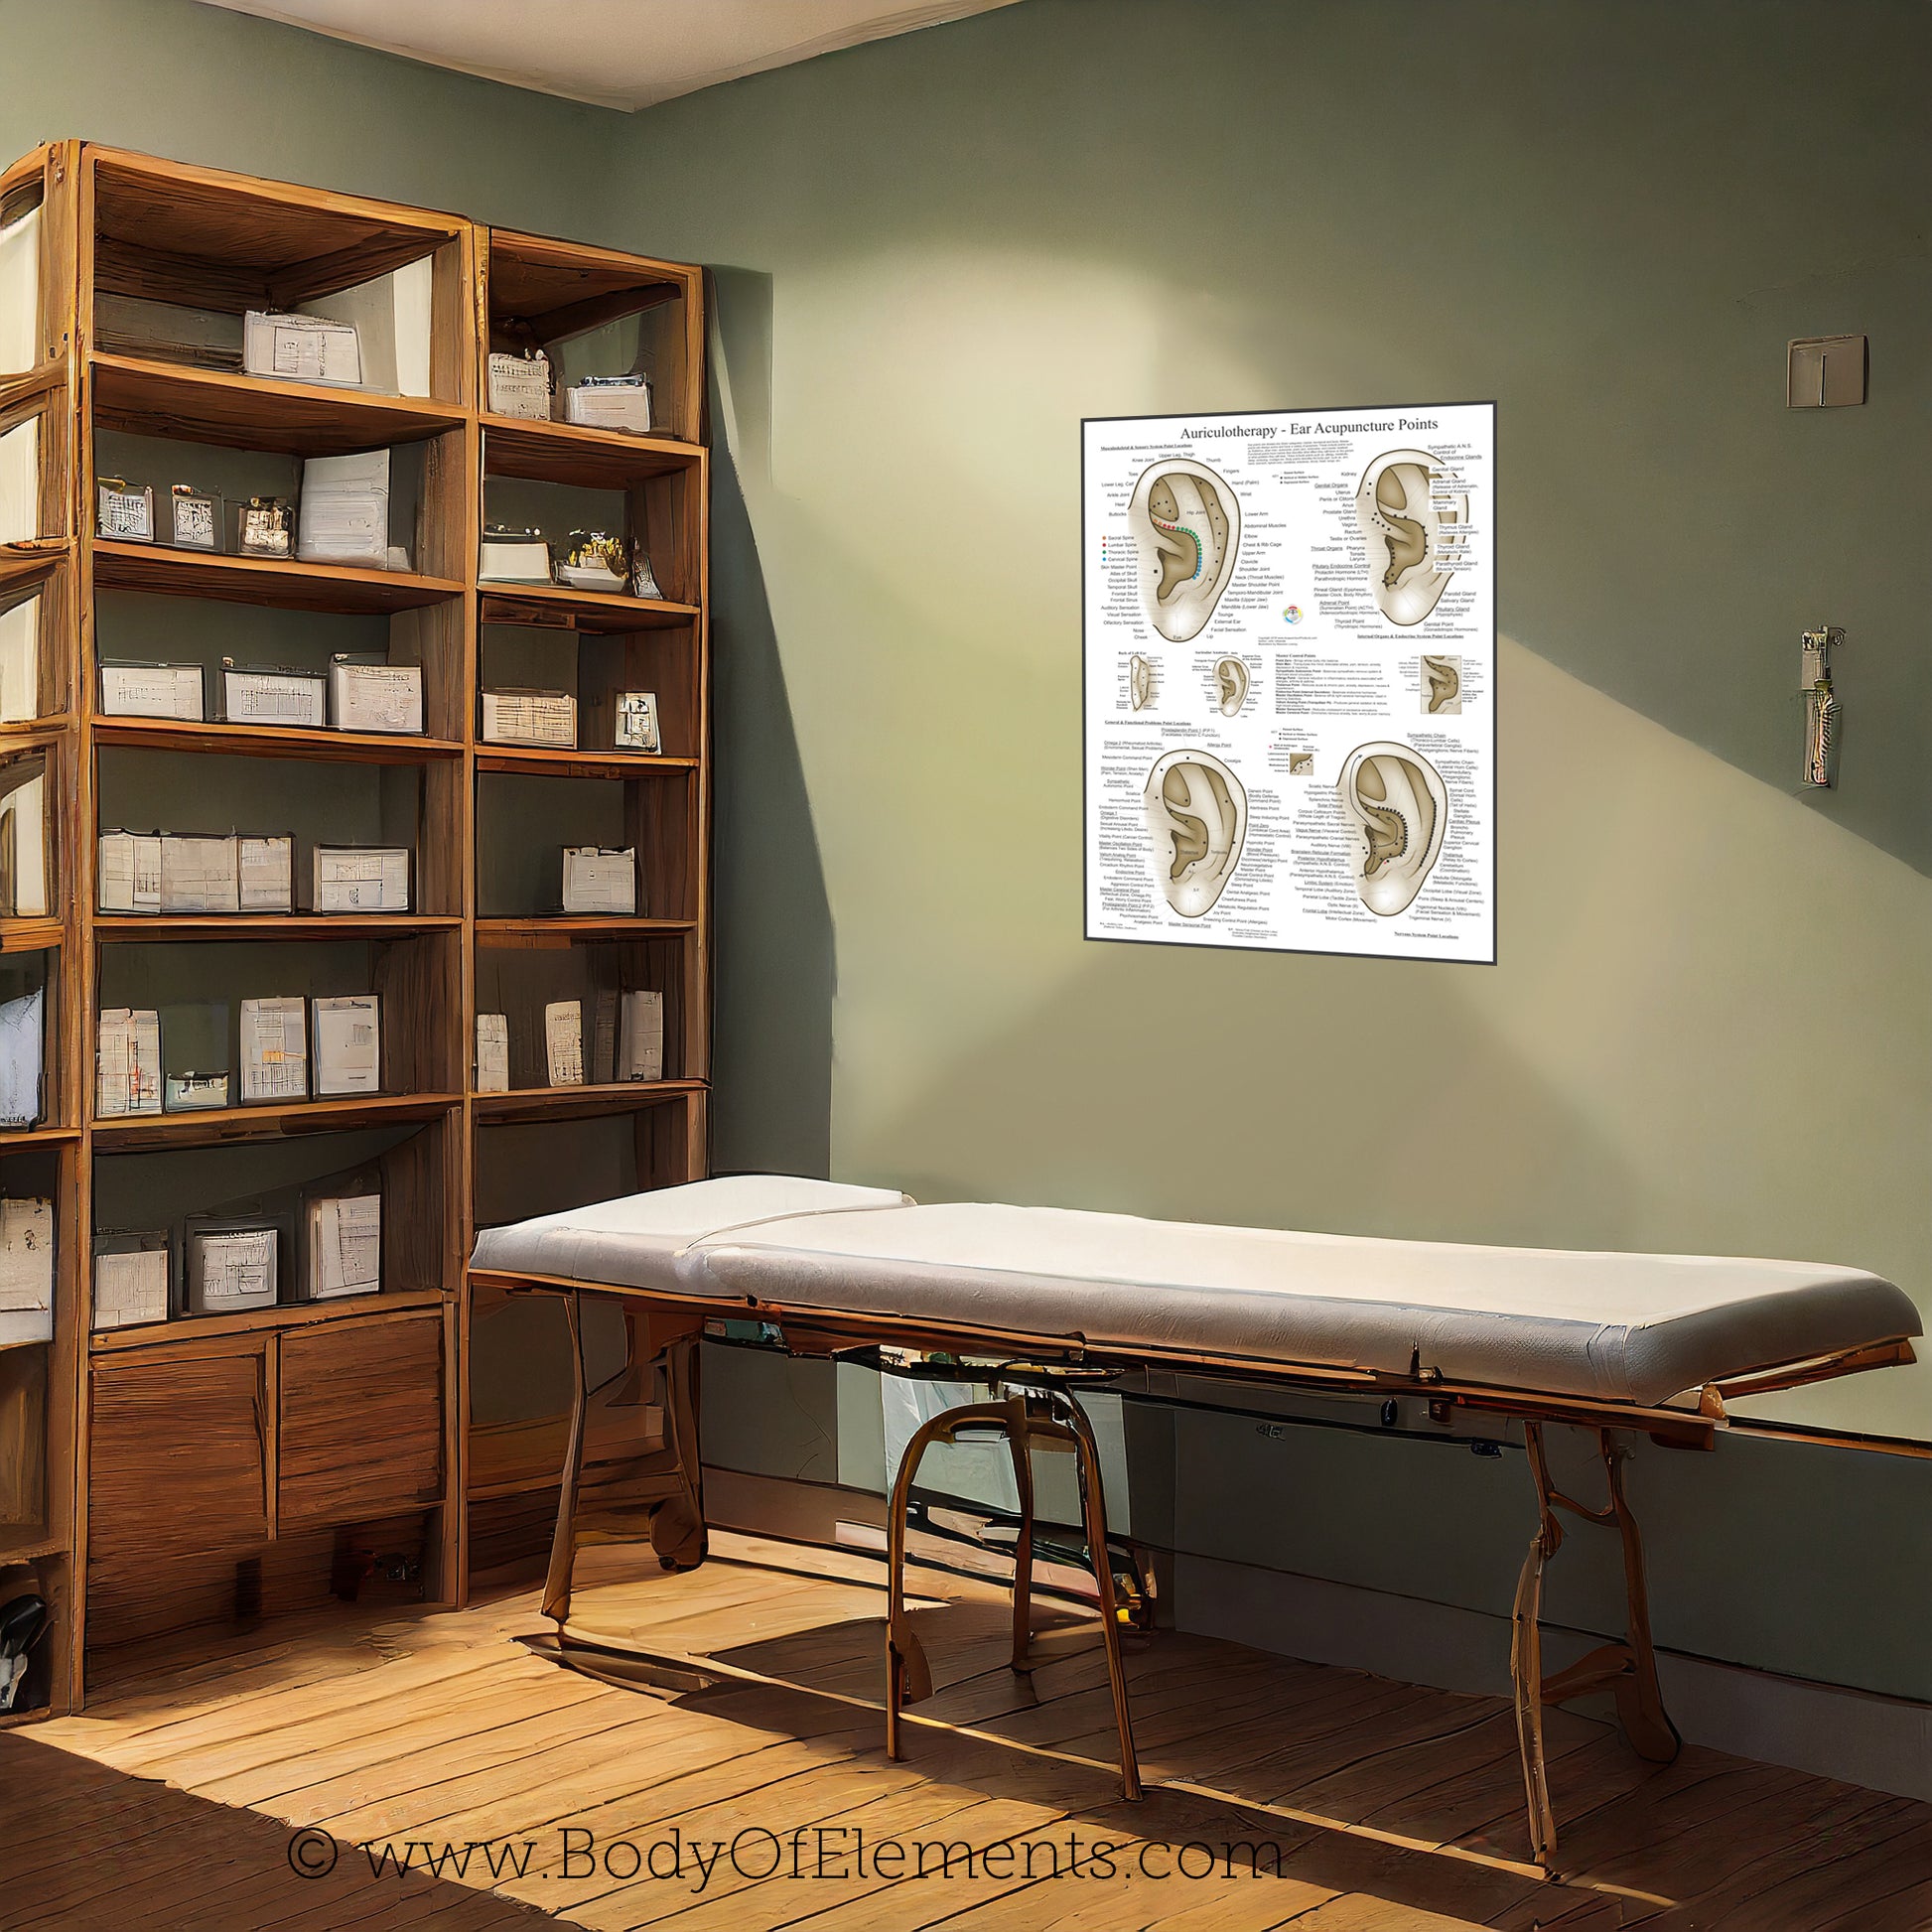 Acupuncture clinic auriculotherapy ear acupuncture wall chart